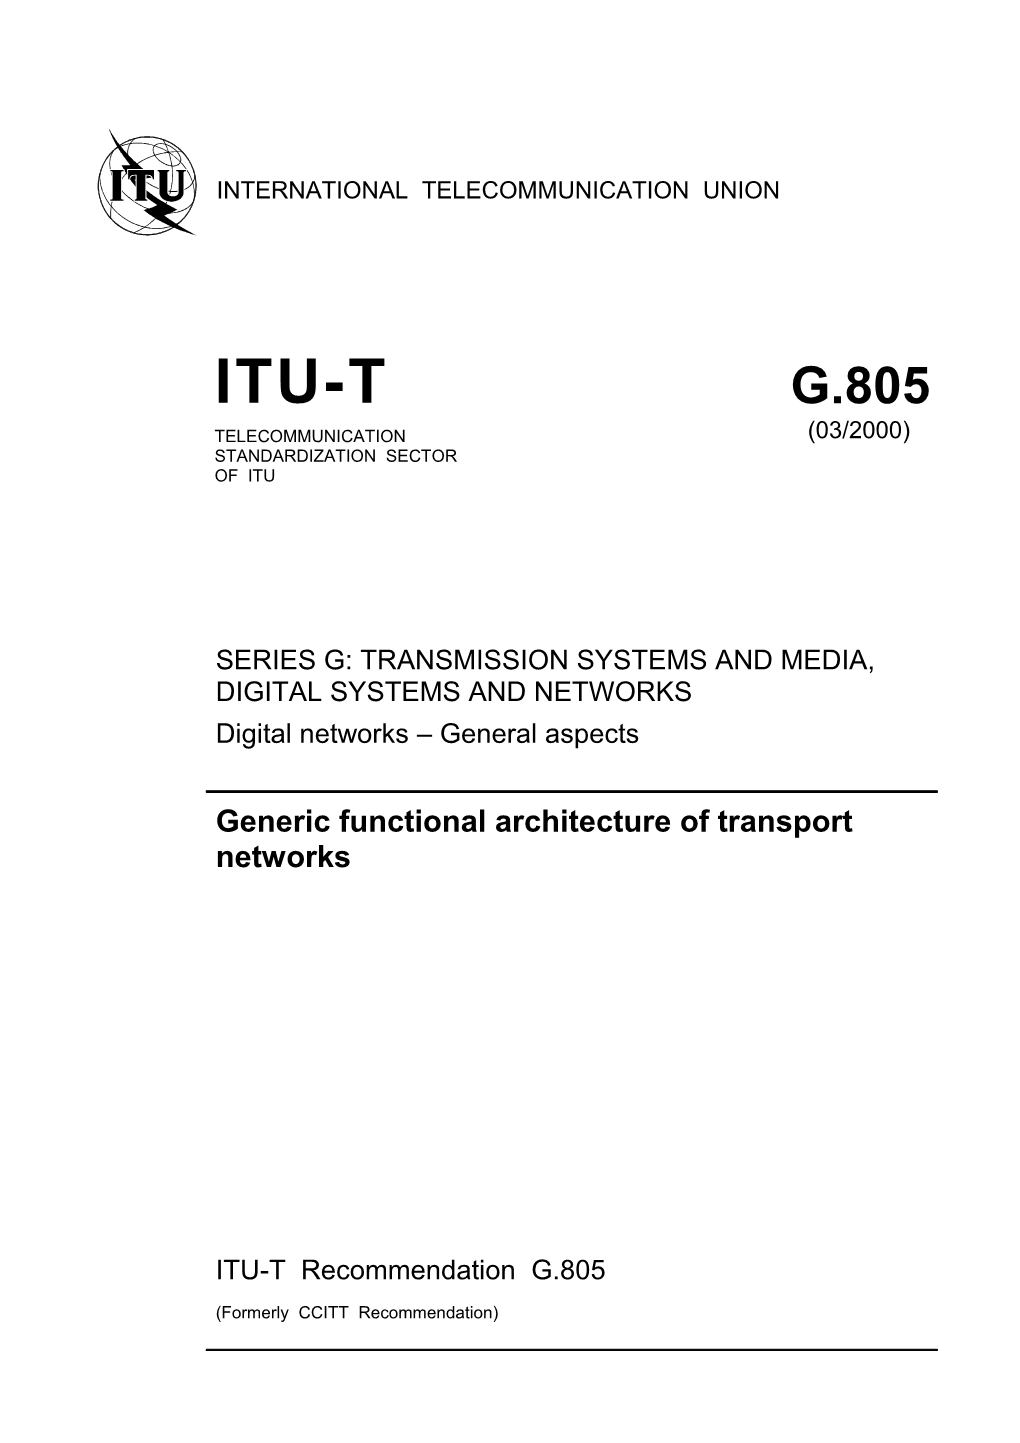 Transmission Systems and Media, Digital Systems and Networks